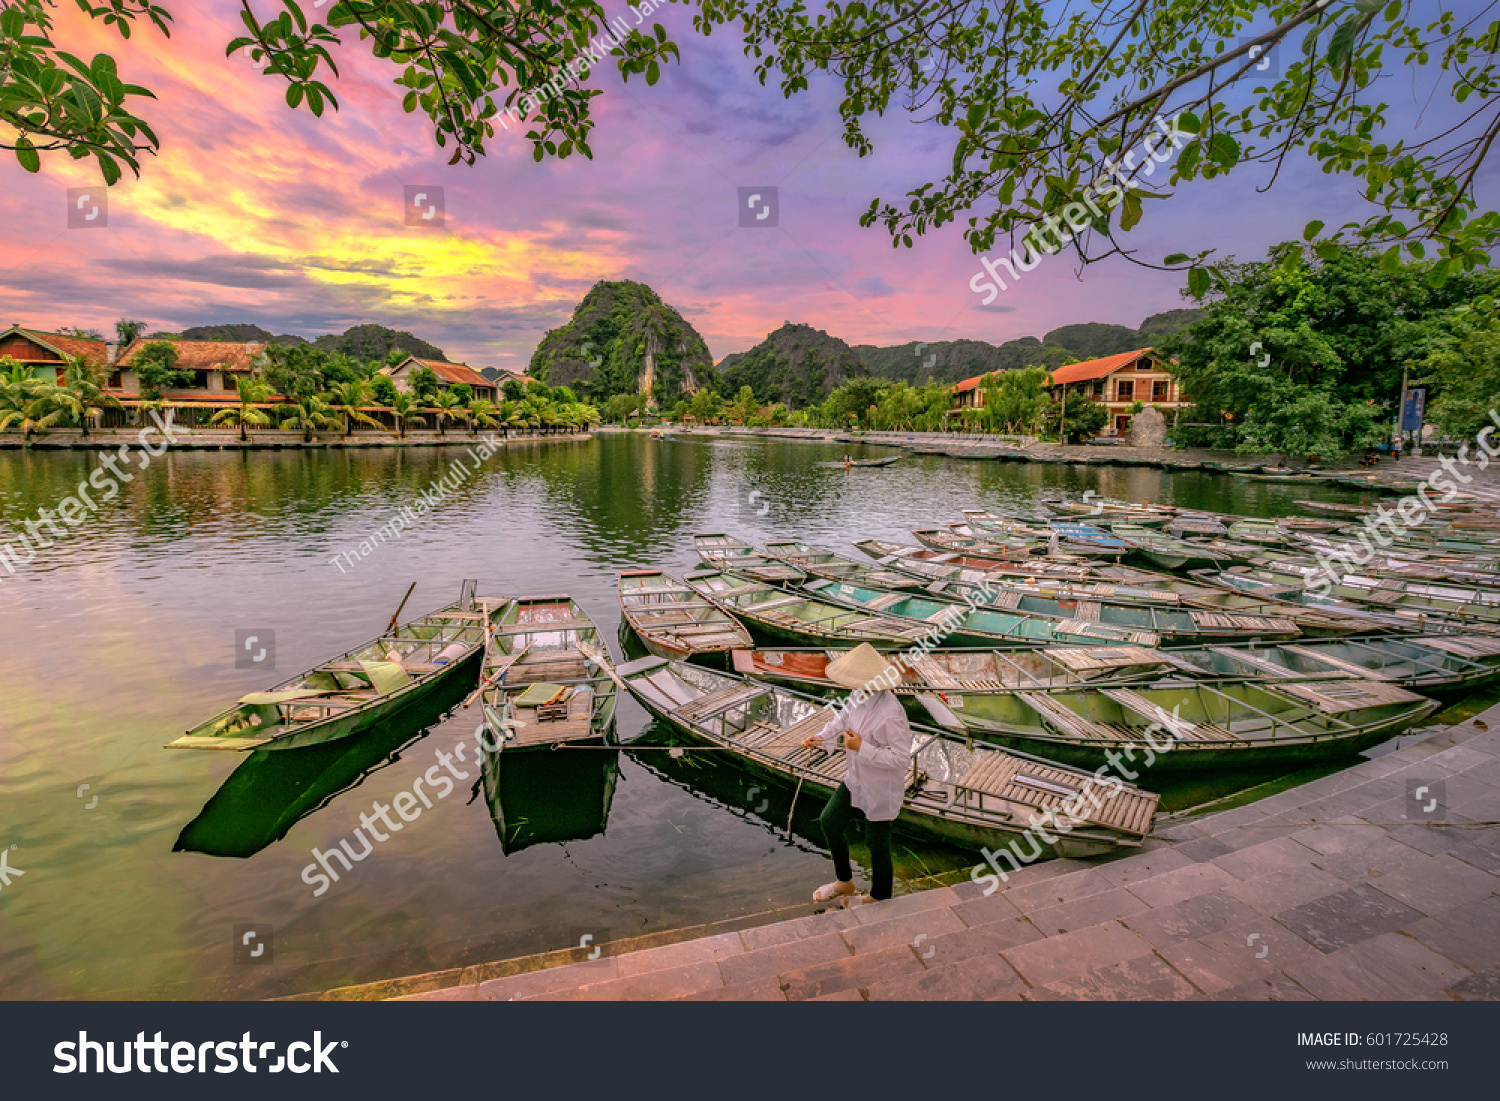 Rowing boat Waiting for passengers at sunrise,Hoa Lu Tam Coc,Hoi An Ancient Town,Vietnam. #601725428